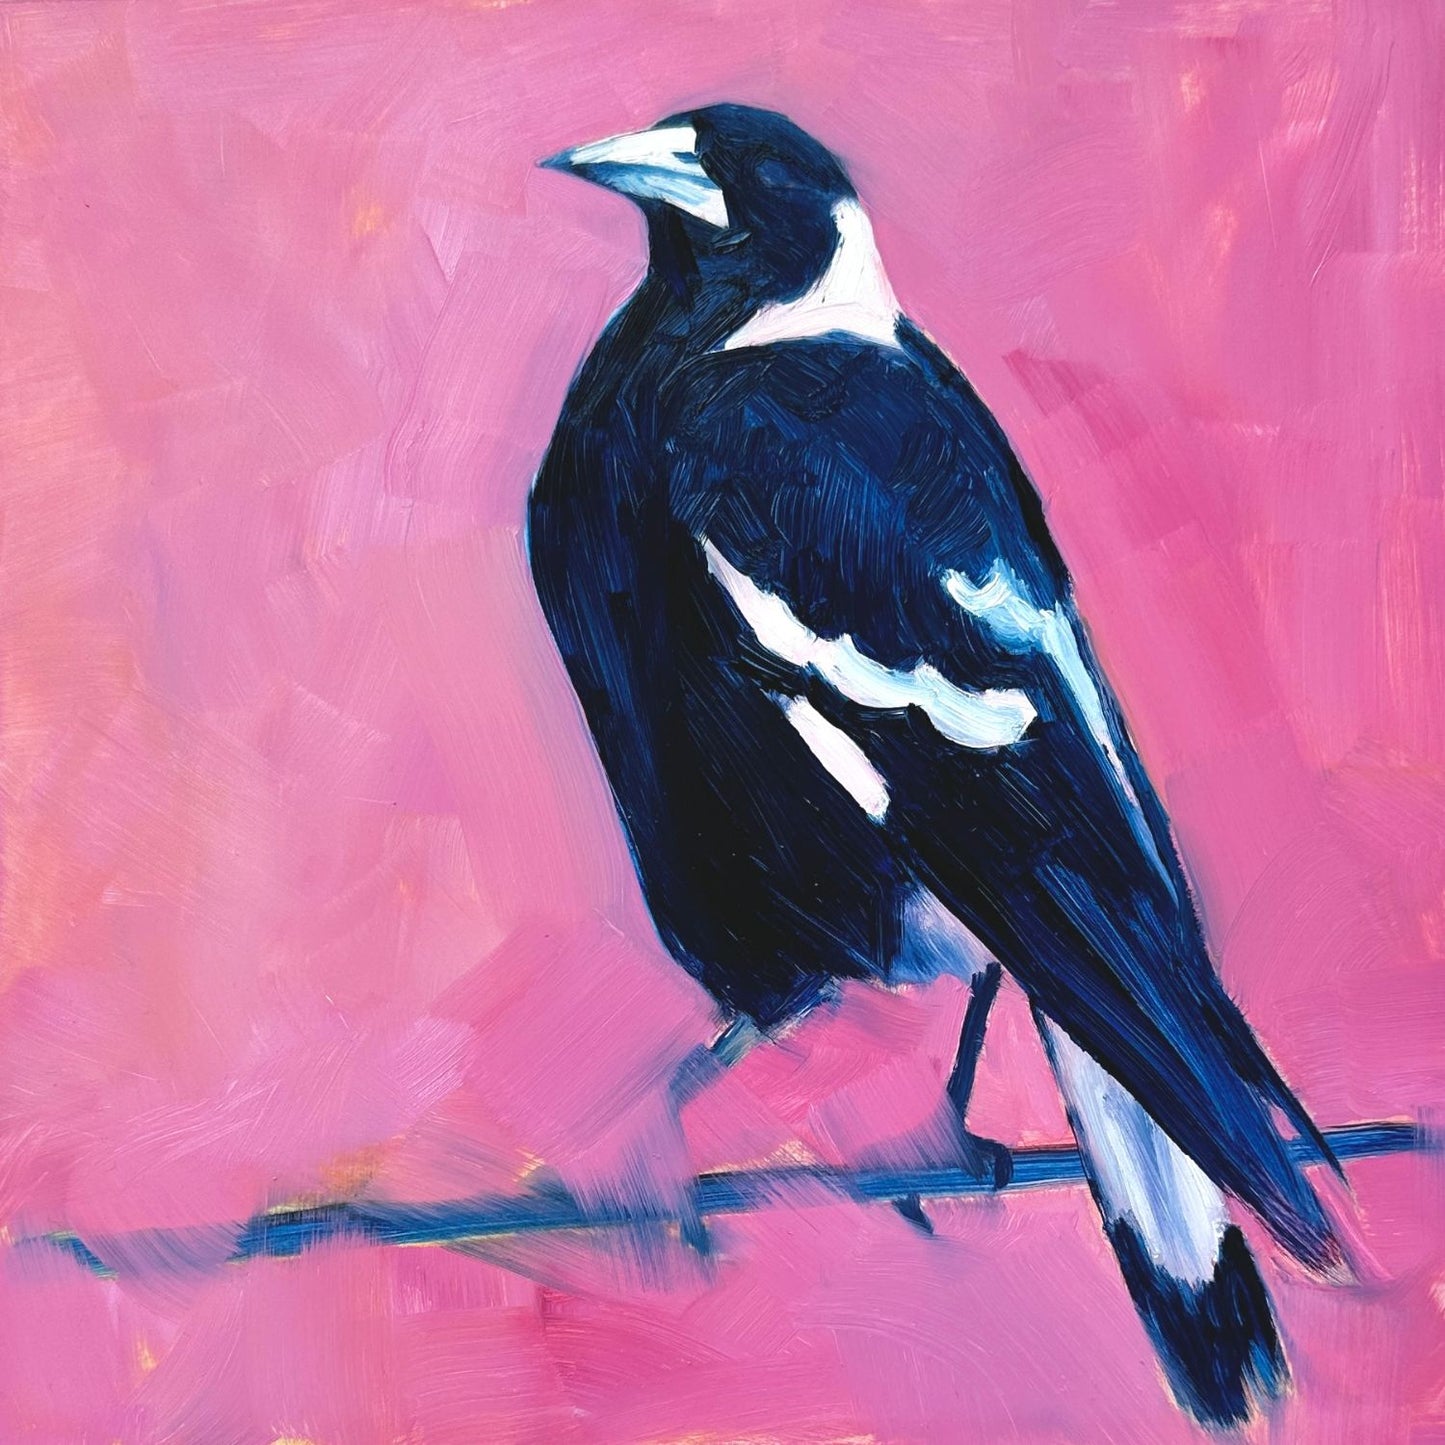 original oil painting of a navy blue and white magpie on a textured bright pink background